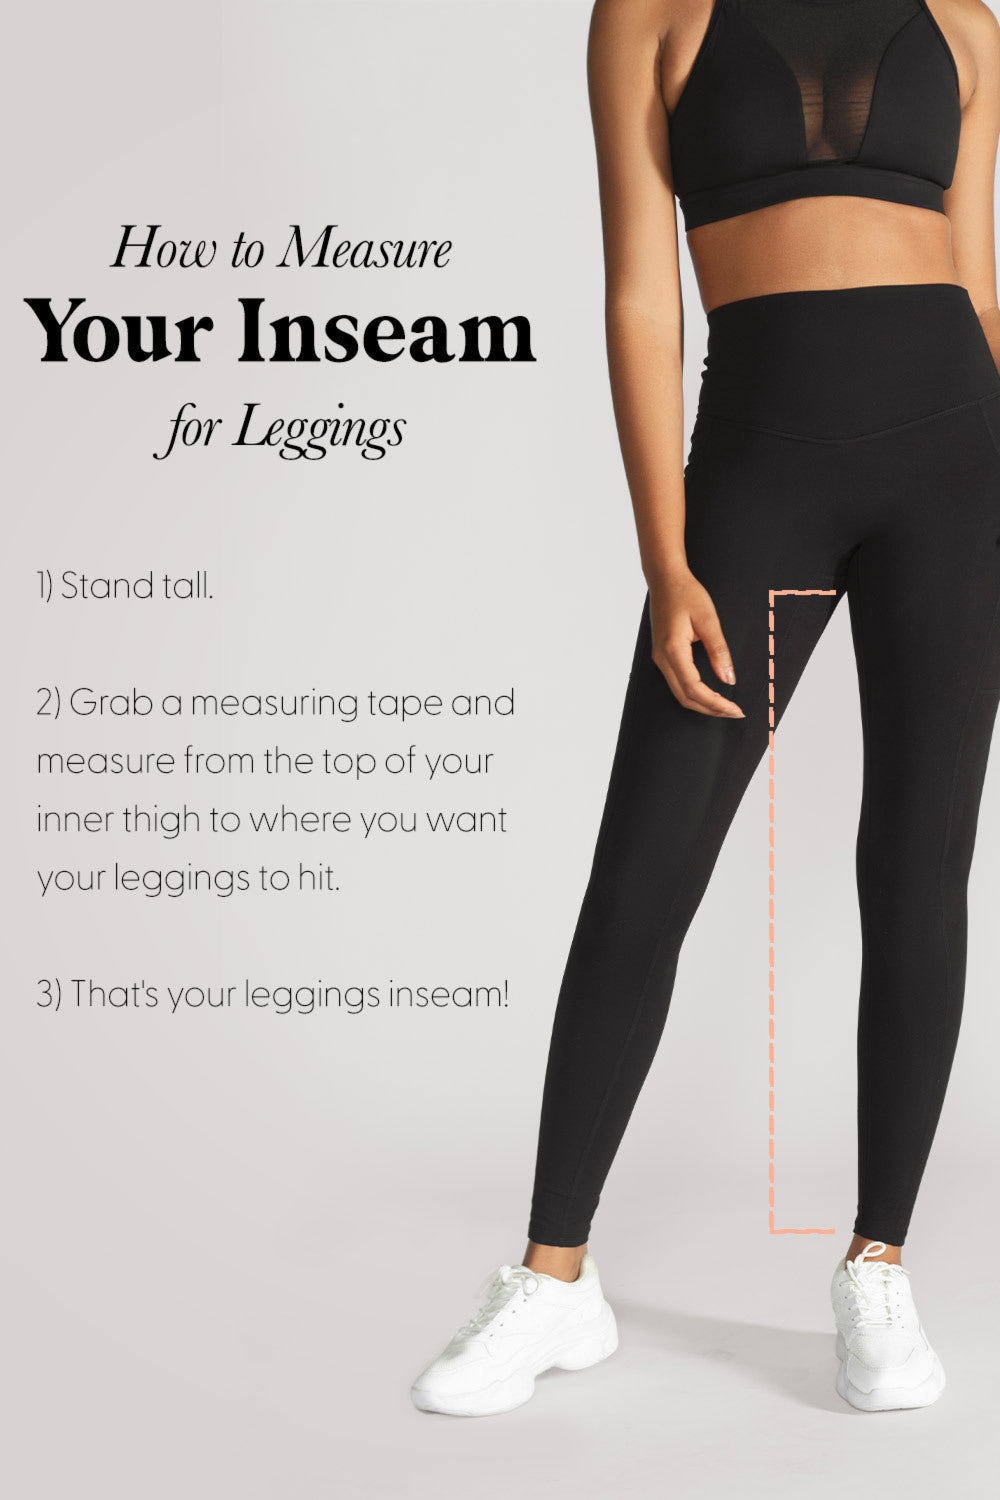 Superslim leggings, flat tummy, draining and hydrating with jacquard python  print inserts